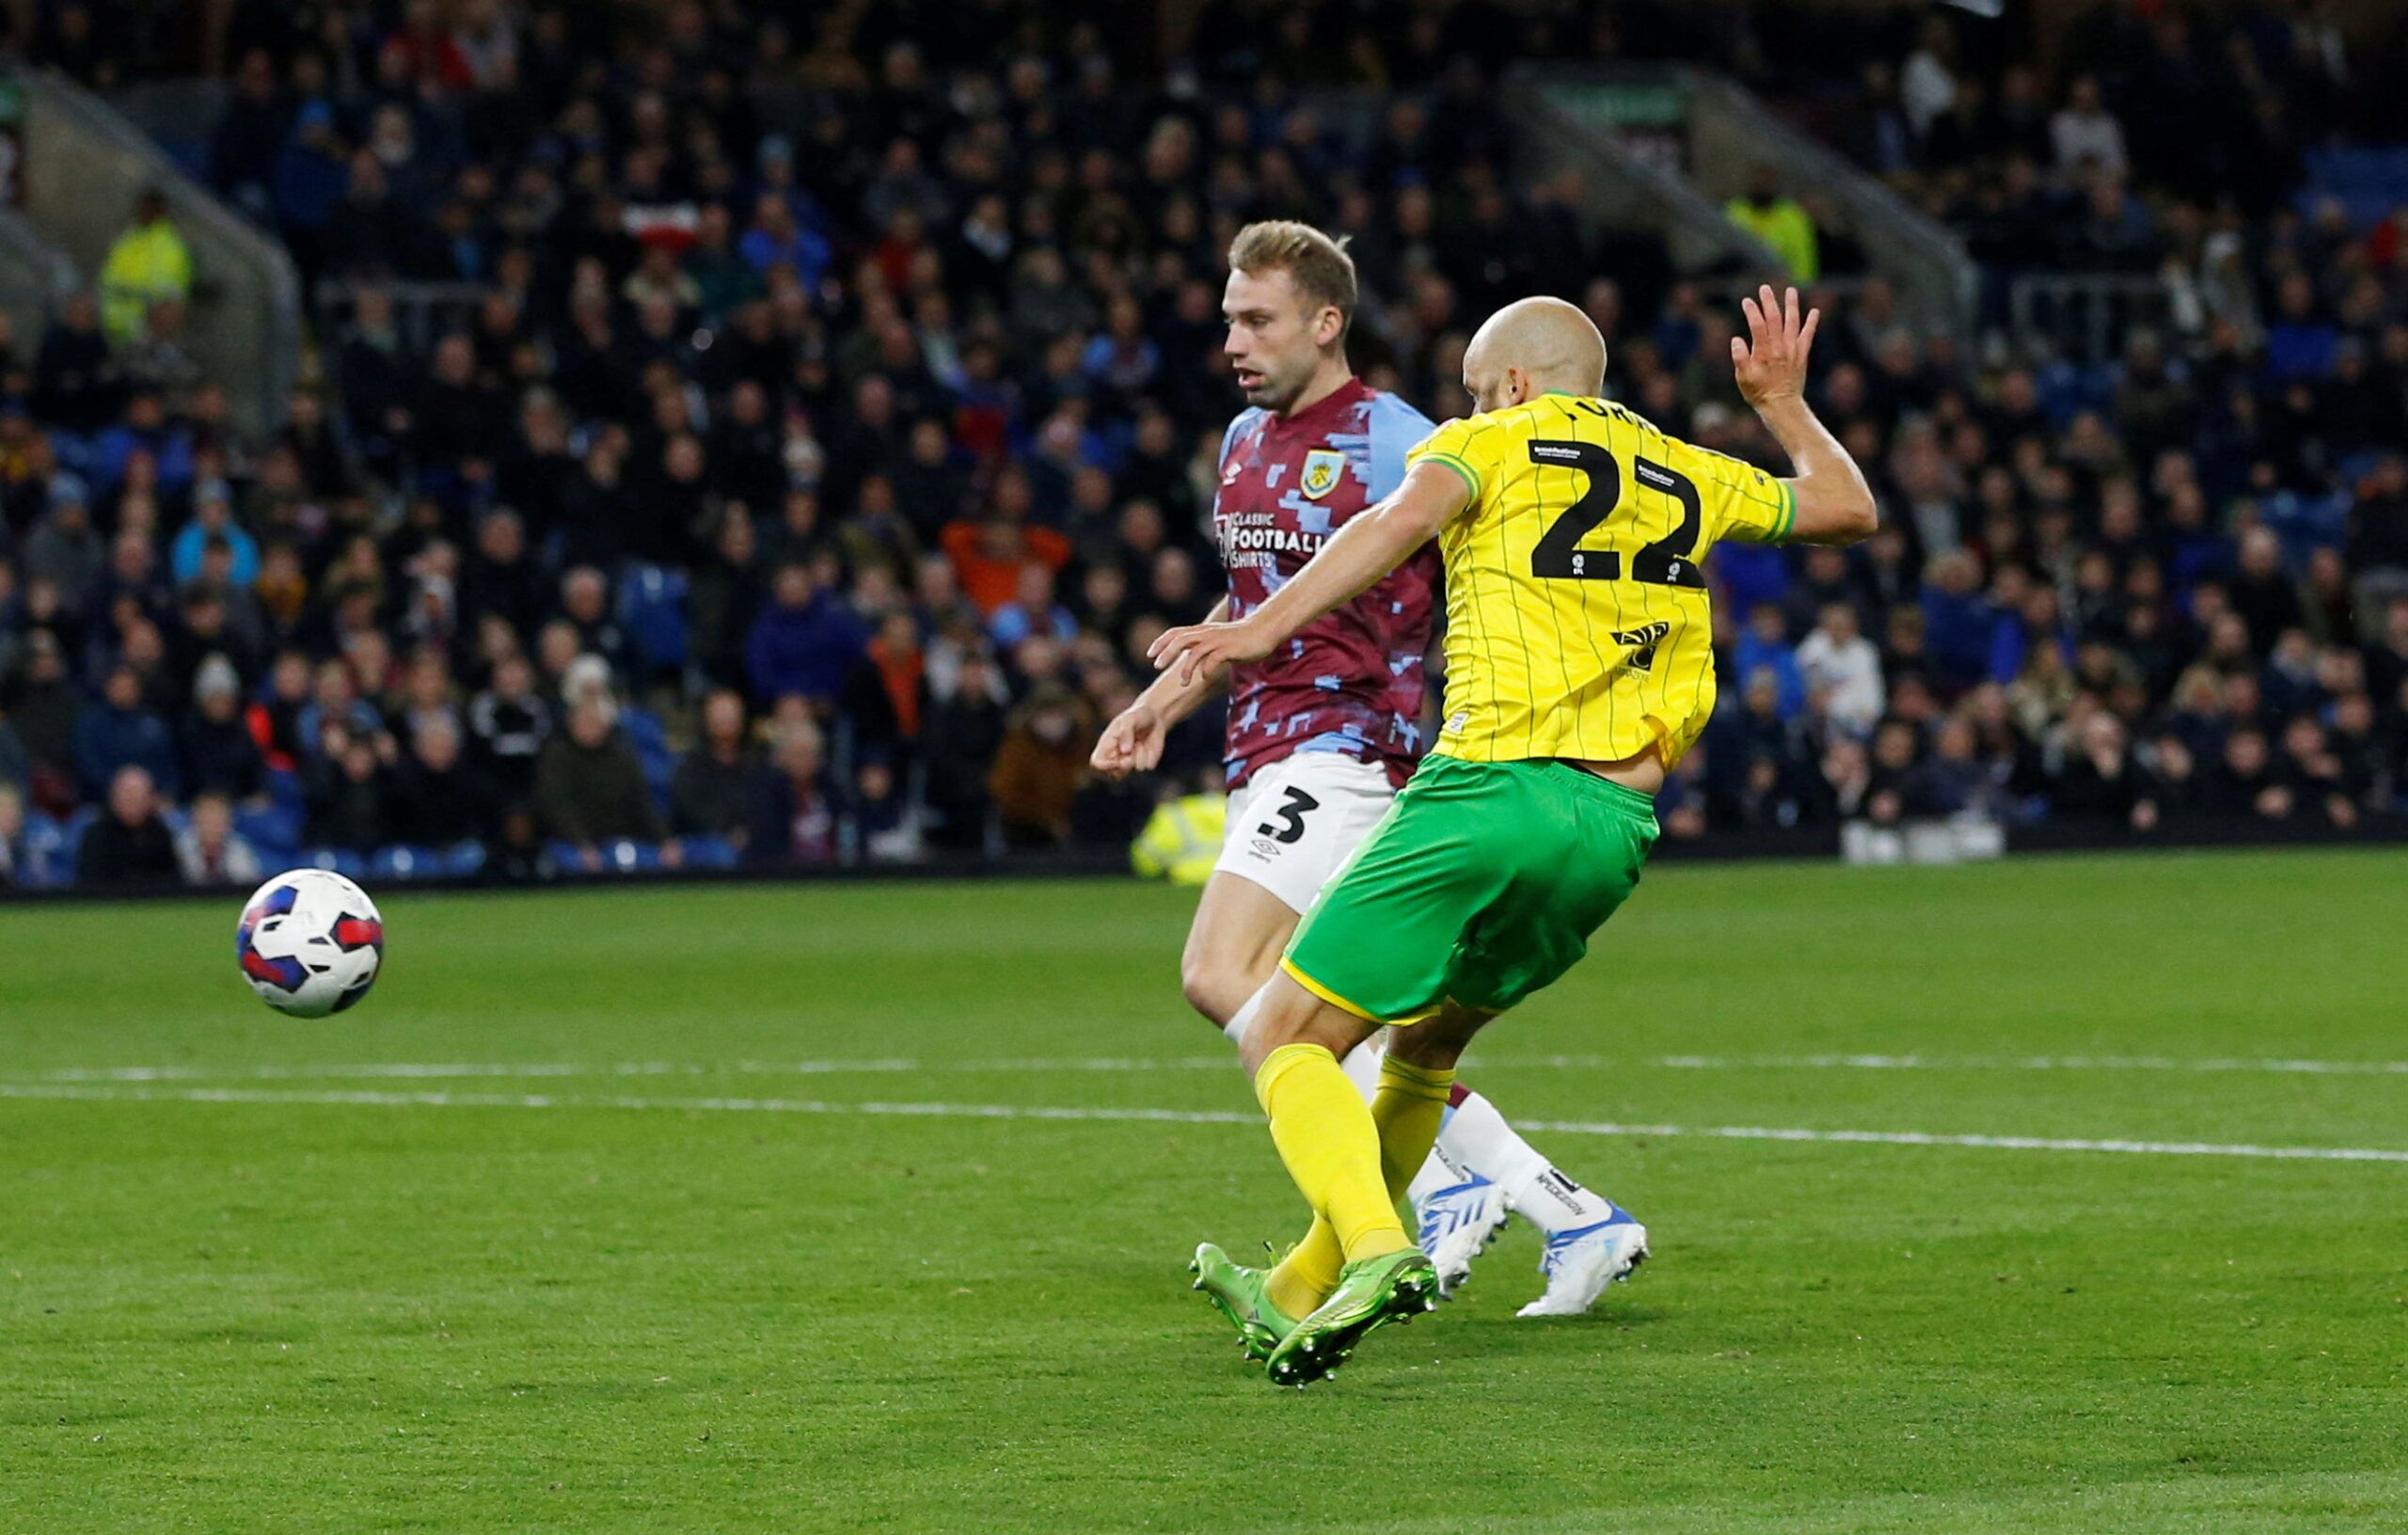 Soccer Football - Championship - Burnley v Norwich City - Turf Moor, Burnley, Britain - October 25, 2022 Norwich City's Teemu Pukki shoots at goal     Action Images/Ed Sykes  EDITORIAL USE ONLY. No use with unauthorized audio, video, data, fixture lists, club/league logos or 